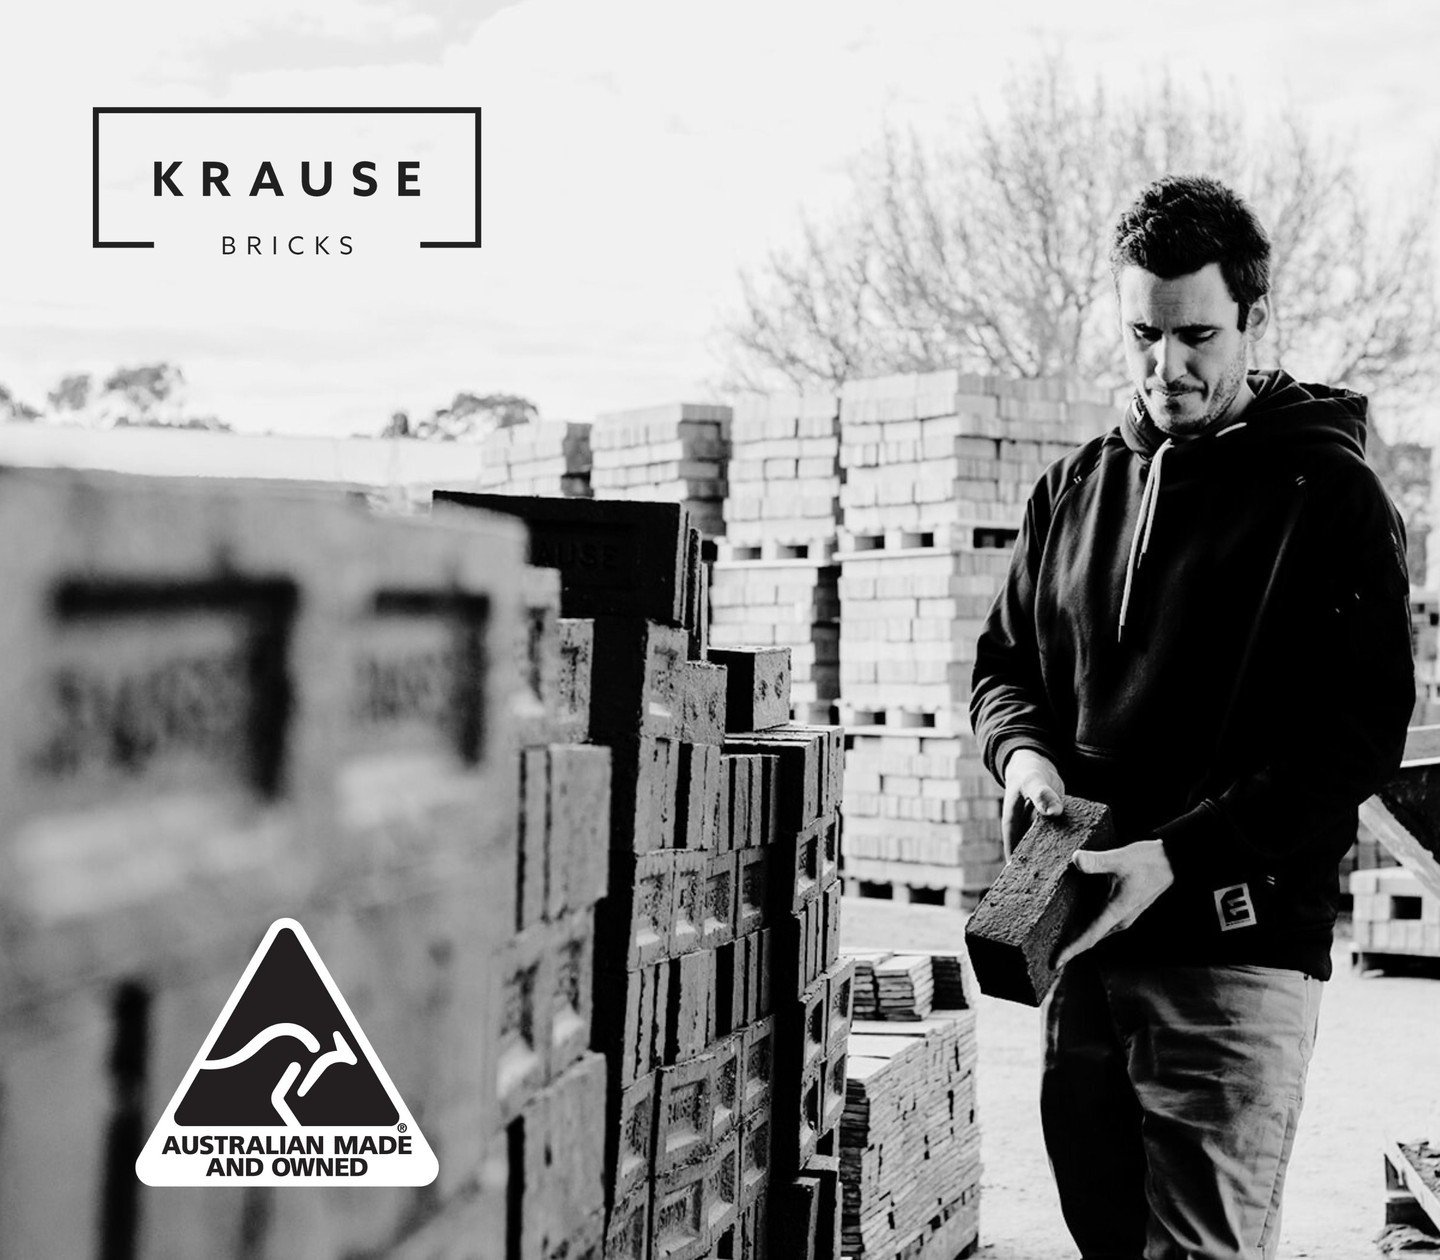 Today marks the start of #AustralianMadeWeek, when we join the @australianmadecampaign in celebrating local makers, growers and producers.

We're proud to wear the Australian Made badge, having made every Krause Bricks on site in Stawell, Victoria si